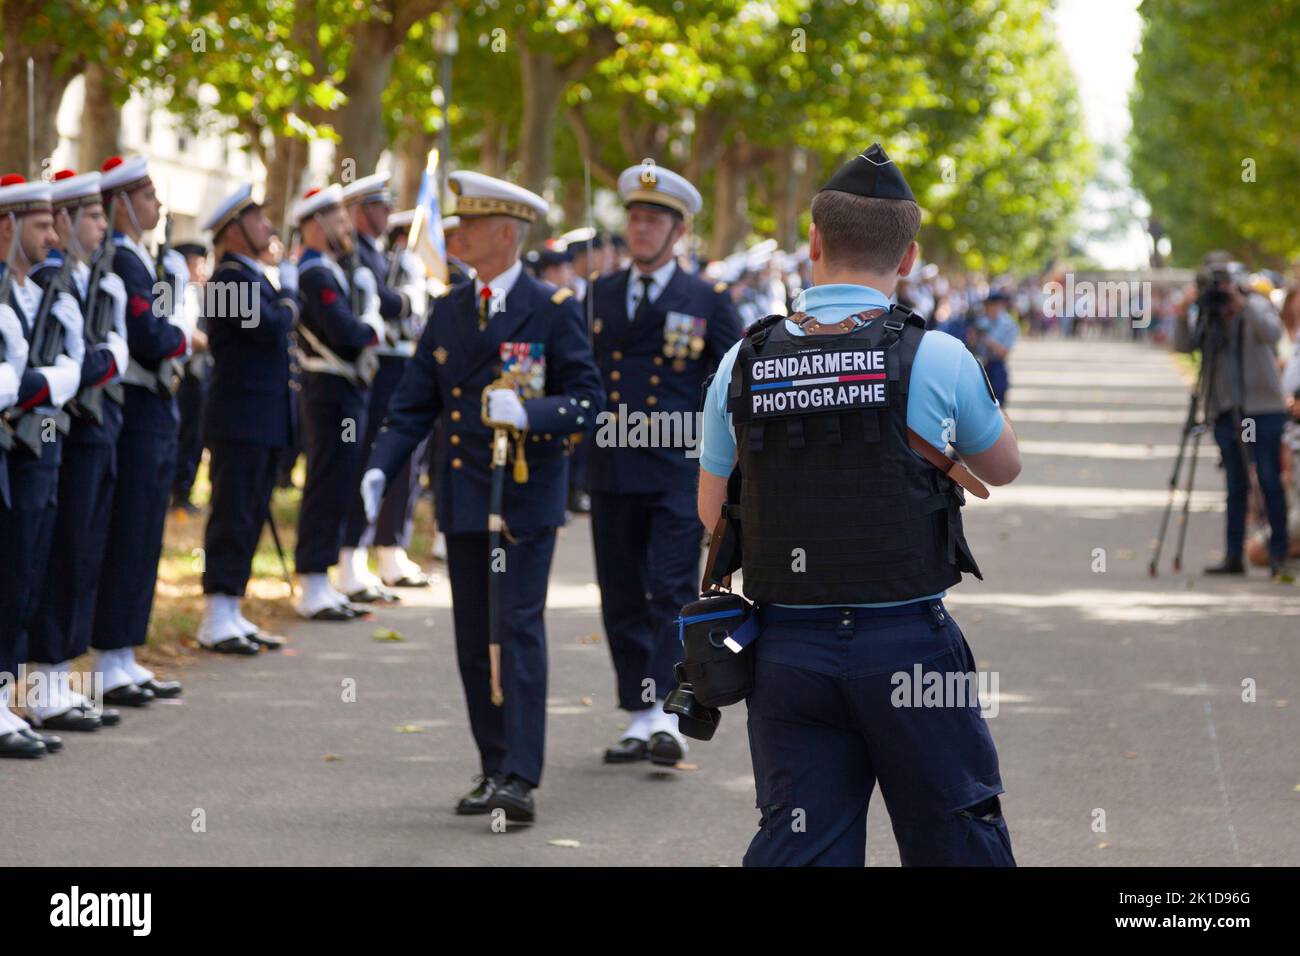 Brest, France - July 14 2022: Photographer from the Gendarmerie taking photos to document the parade of the Bastille Day. Stock Photo